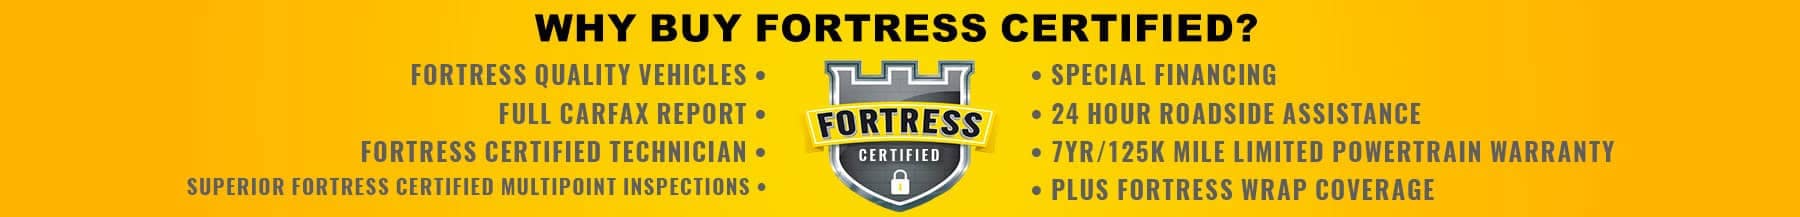 Why Buy Fortress Certified?